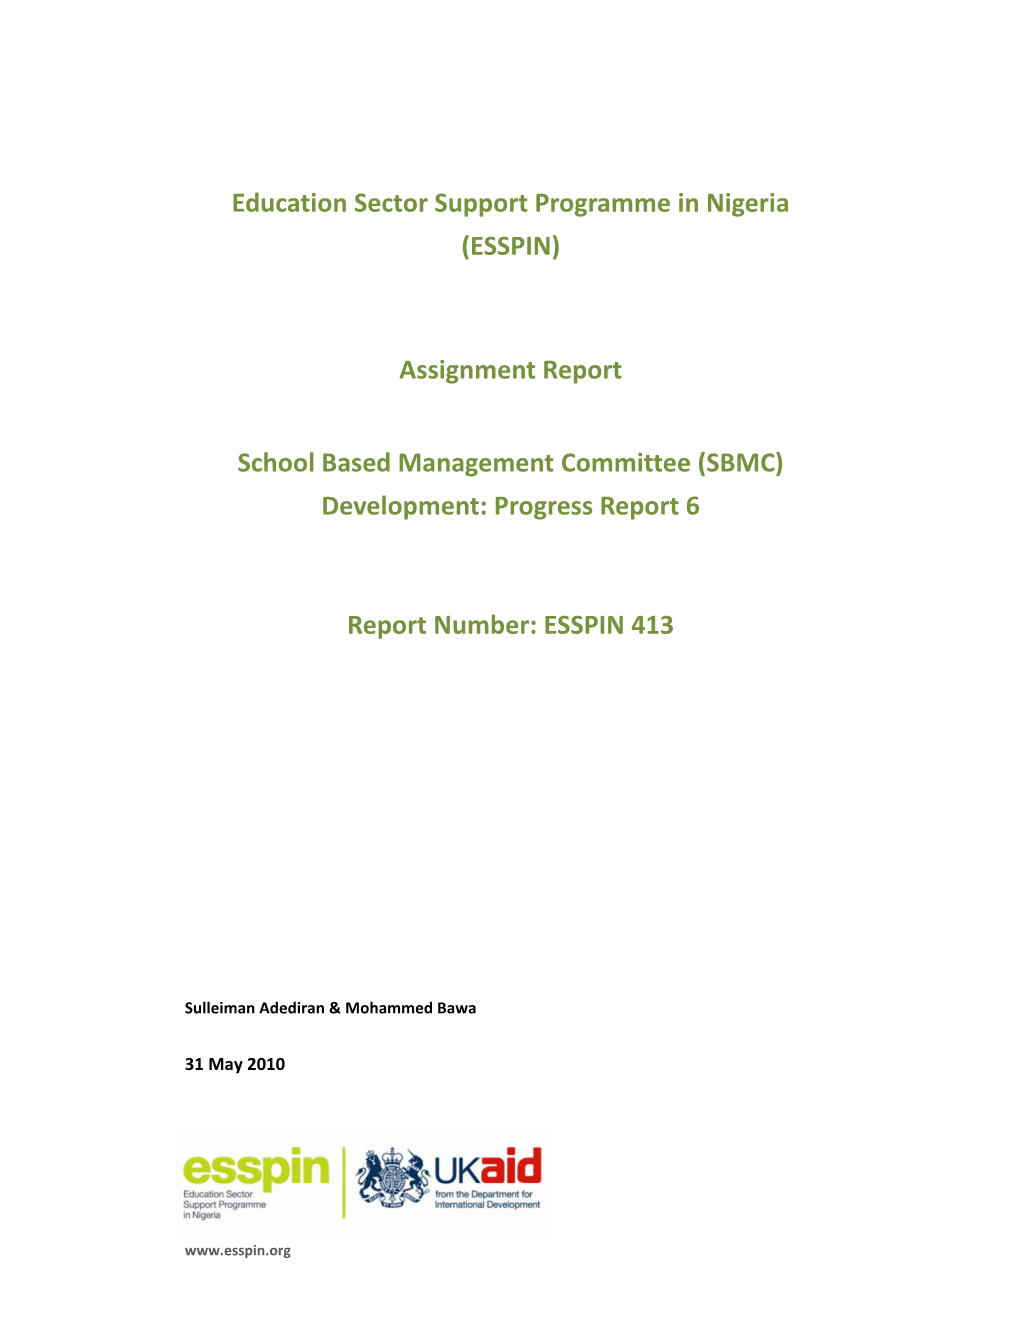 Education Sector Support Programme in Nigeria (ESSPIN) Assignment Report School Based Management Committee (SBMC) Development